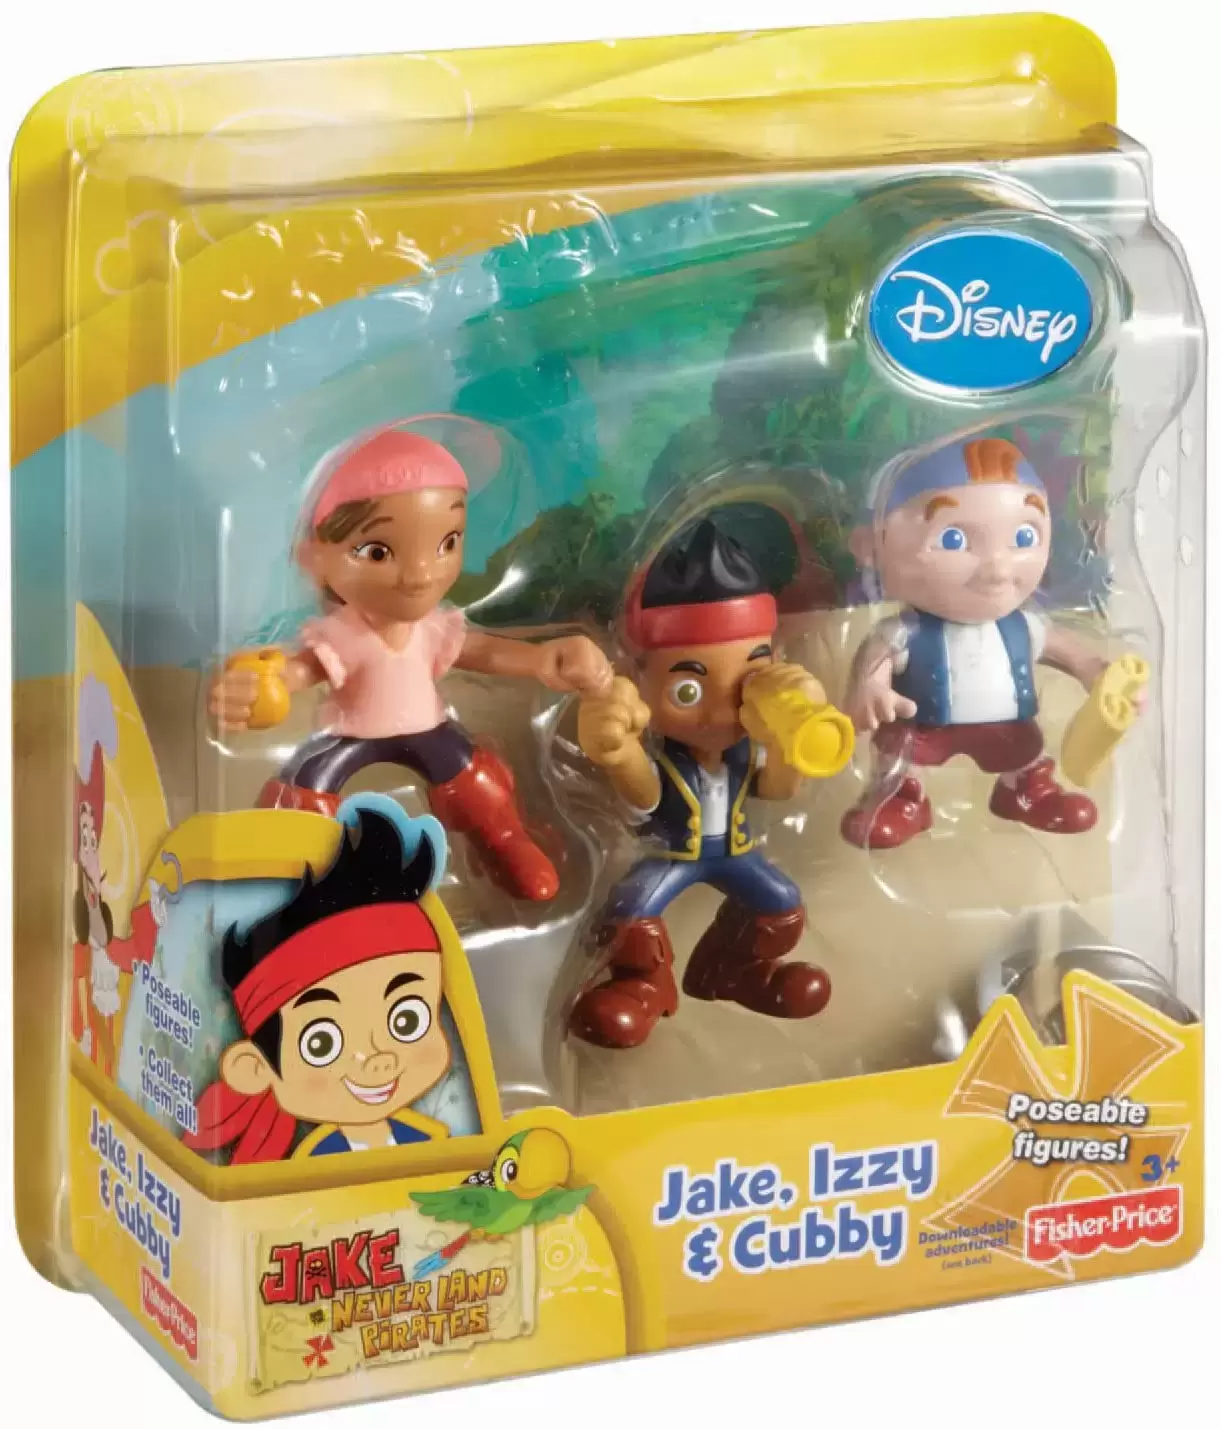 Jakeand The Never Land Pirates - Fisher Price - Jake, Izzy & Cubby